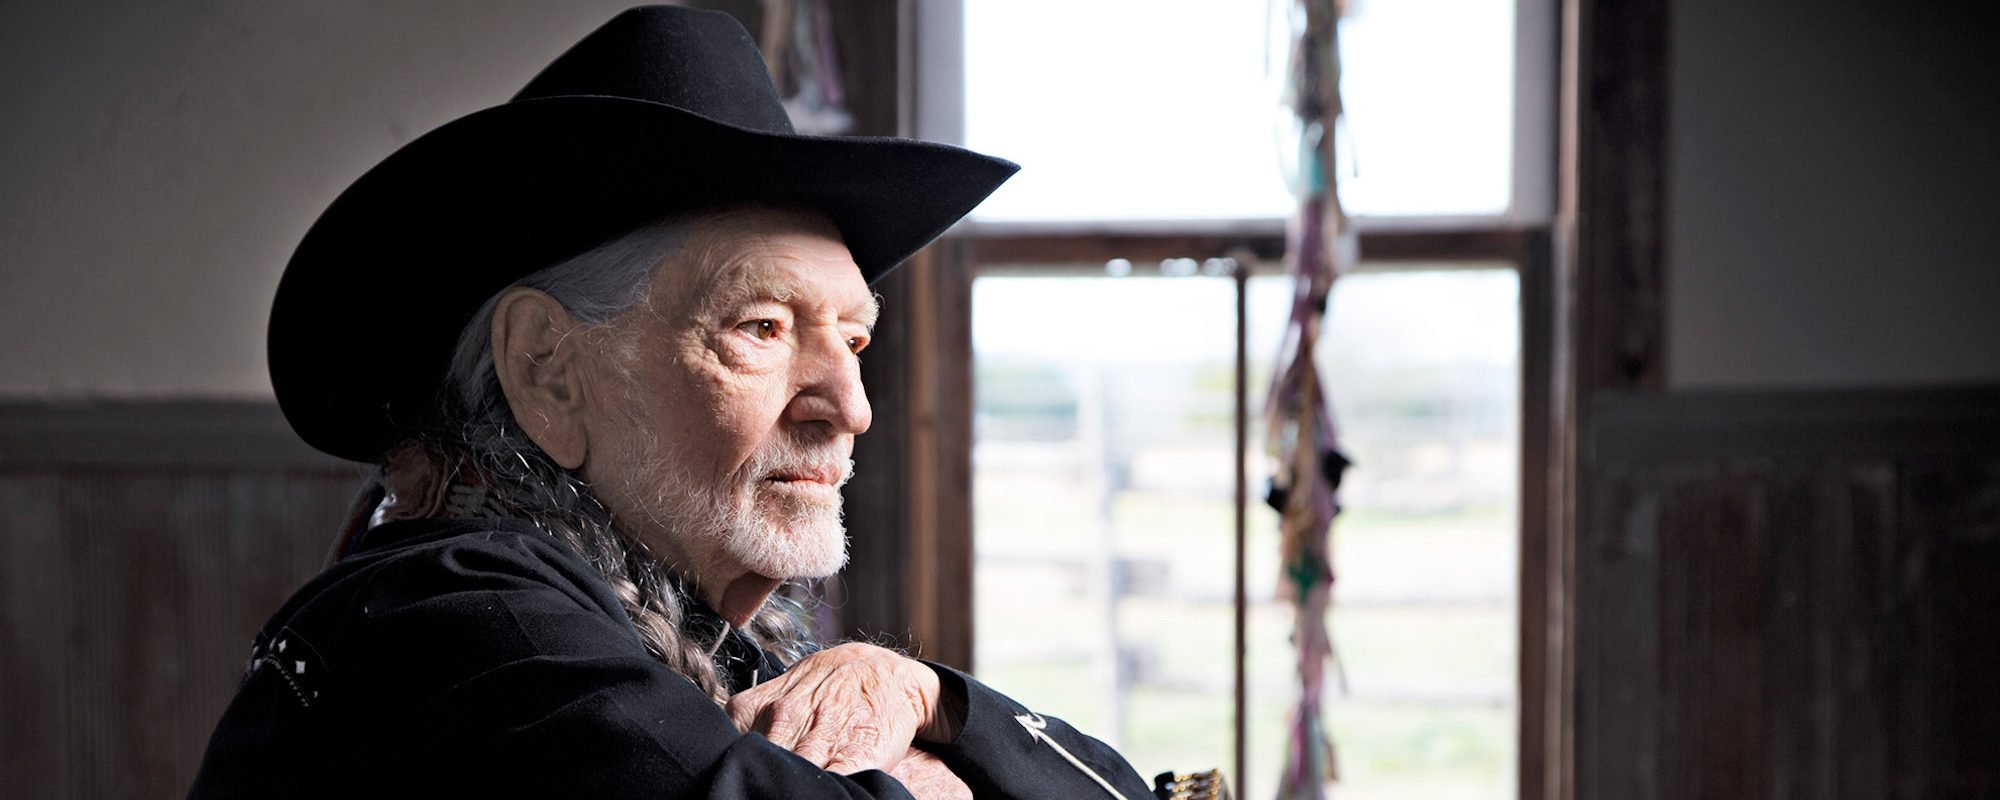 6 Songs You Didn’t Know Willie Nelson Wrote That Were Made Famous by Other Artists